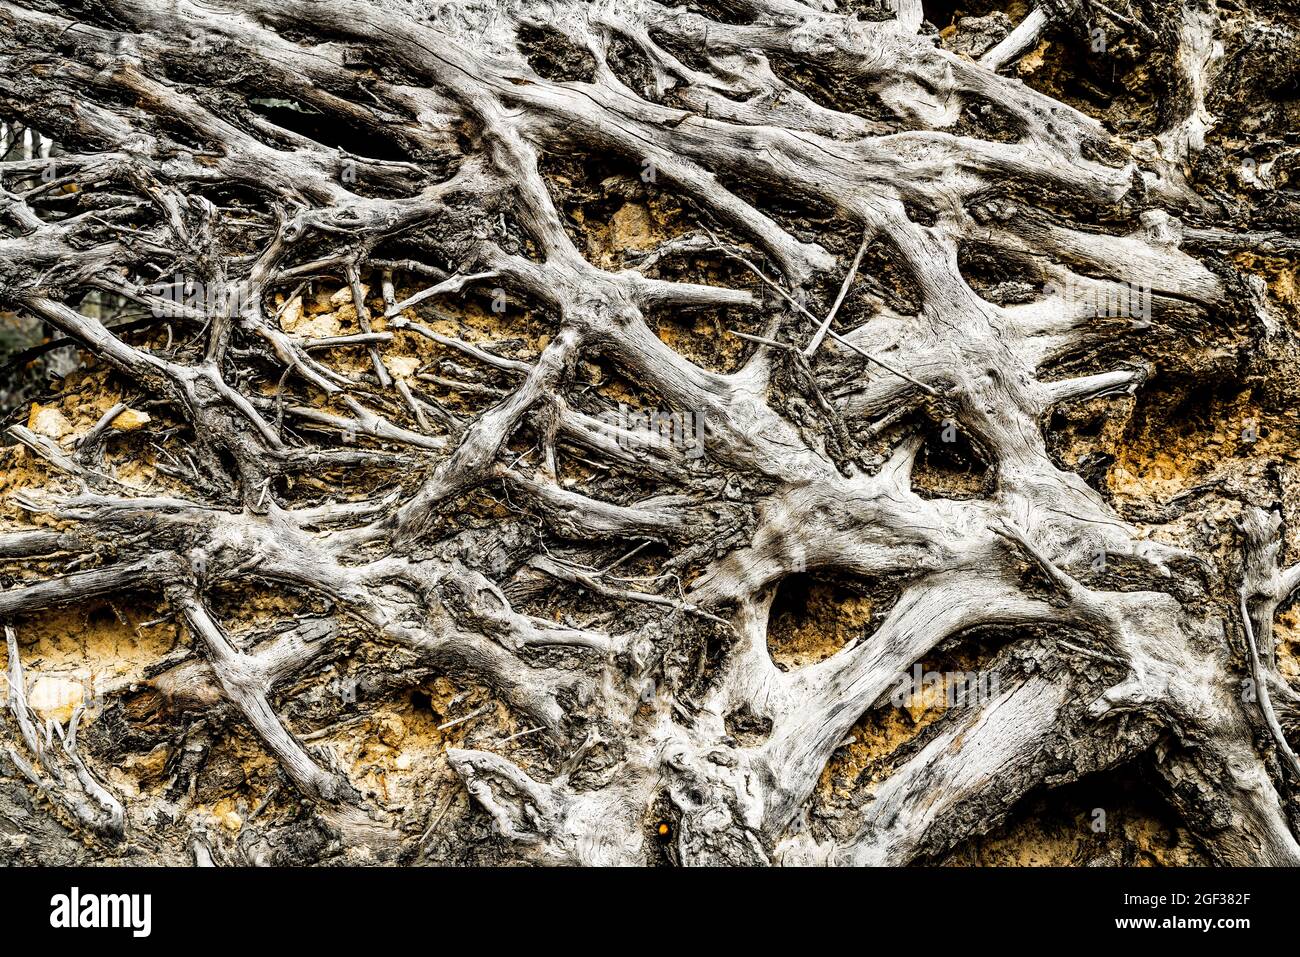 Close-up image of roots of a fallen tree Stock Photo